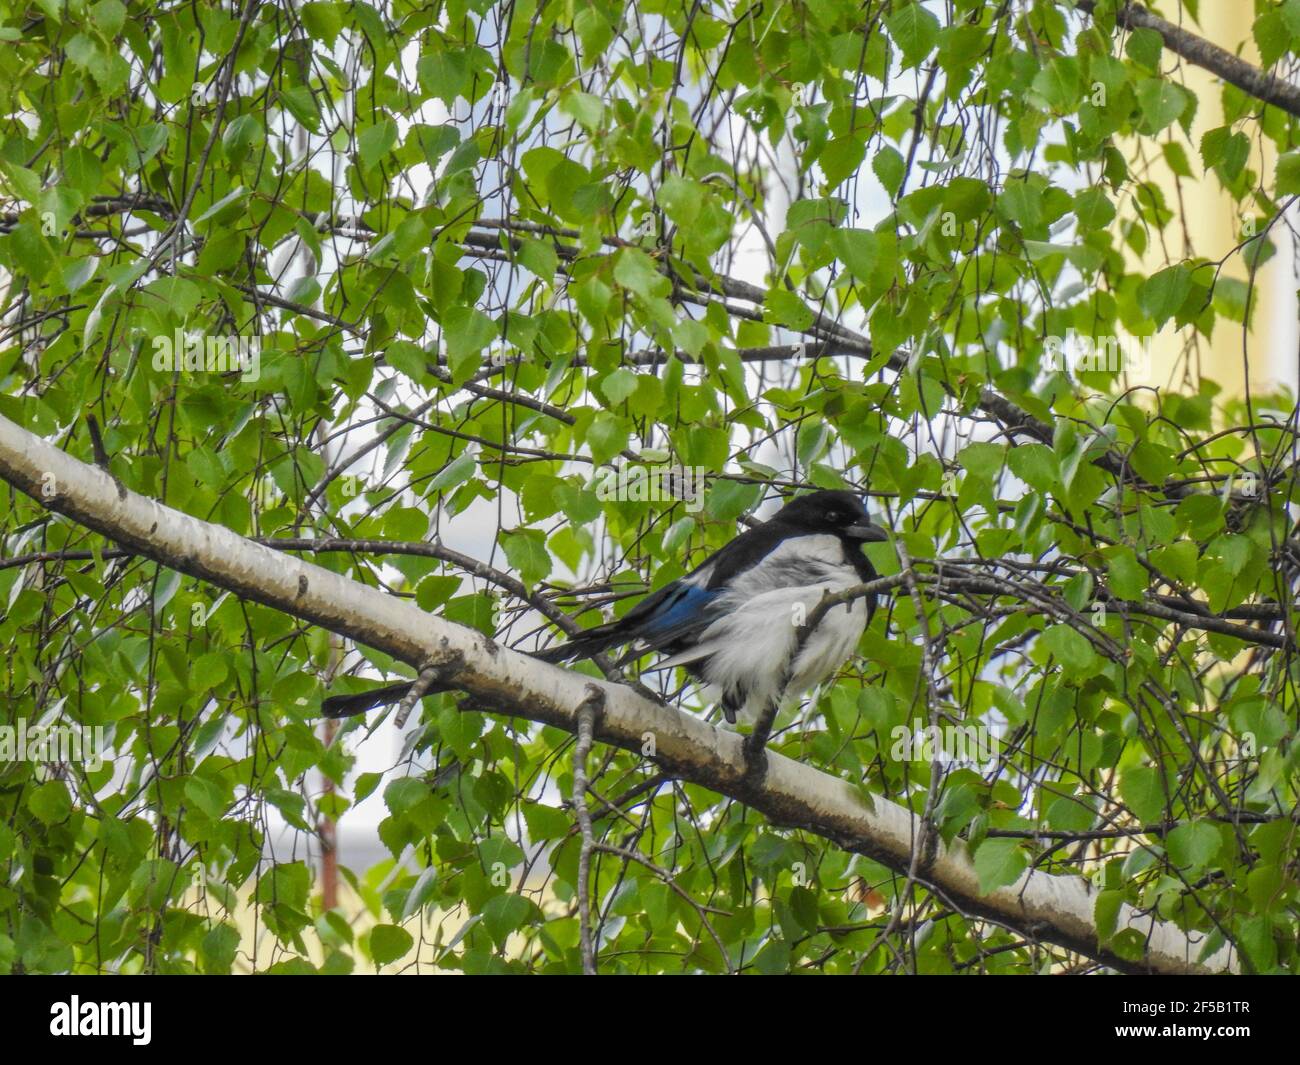 The oriental magpie-robin is a small passerine bird occurring across most of the Indian subcontinent and parts of Southeast Asia.The oriental magpie-r Stock Photo